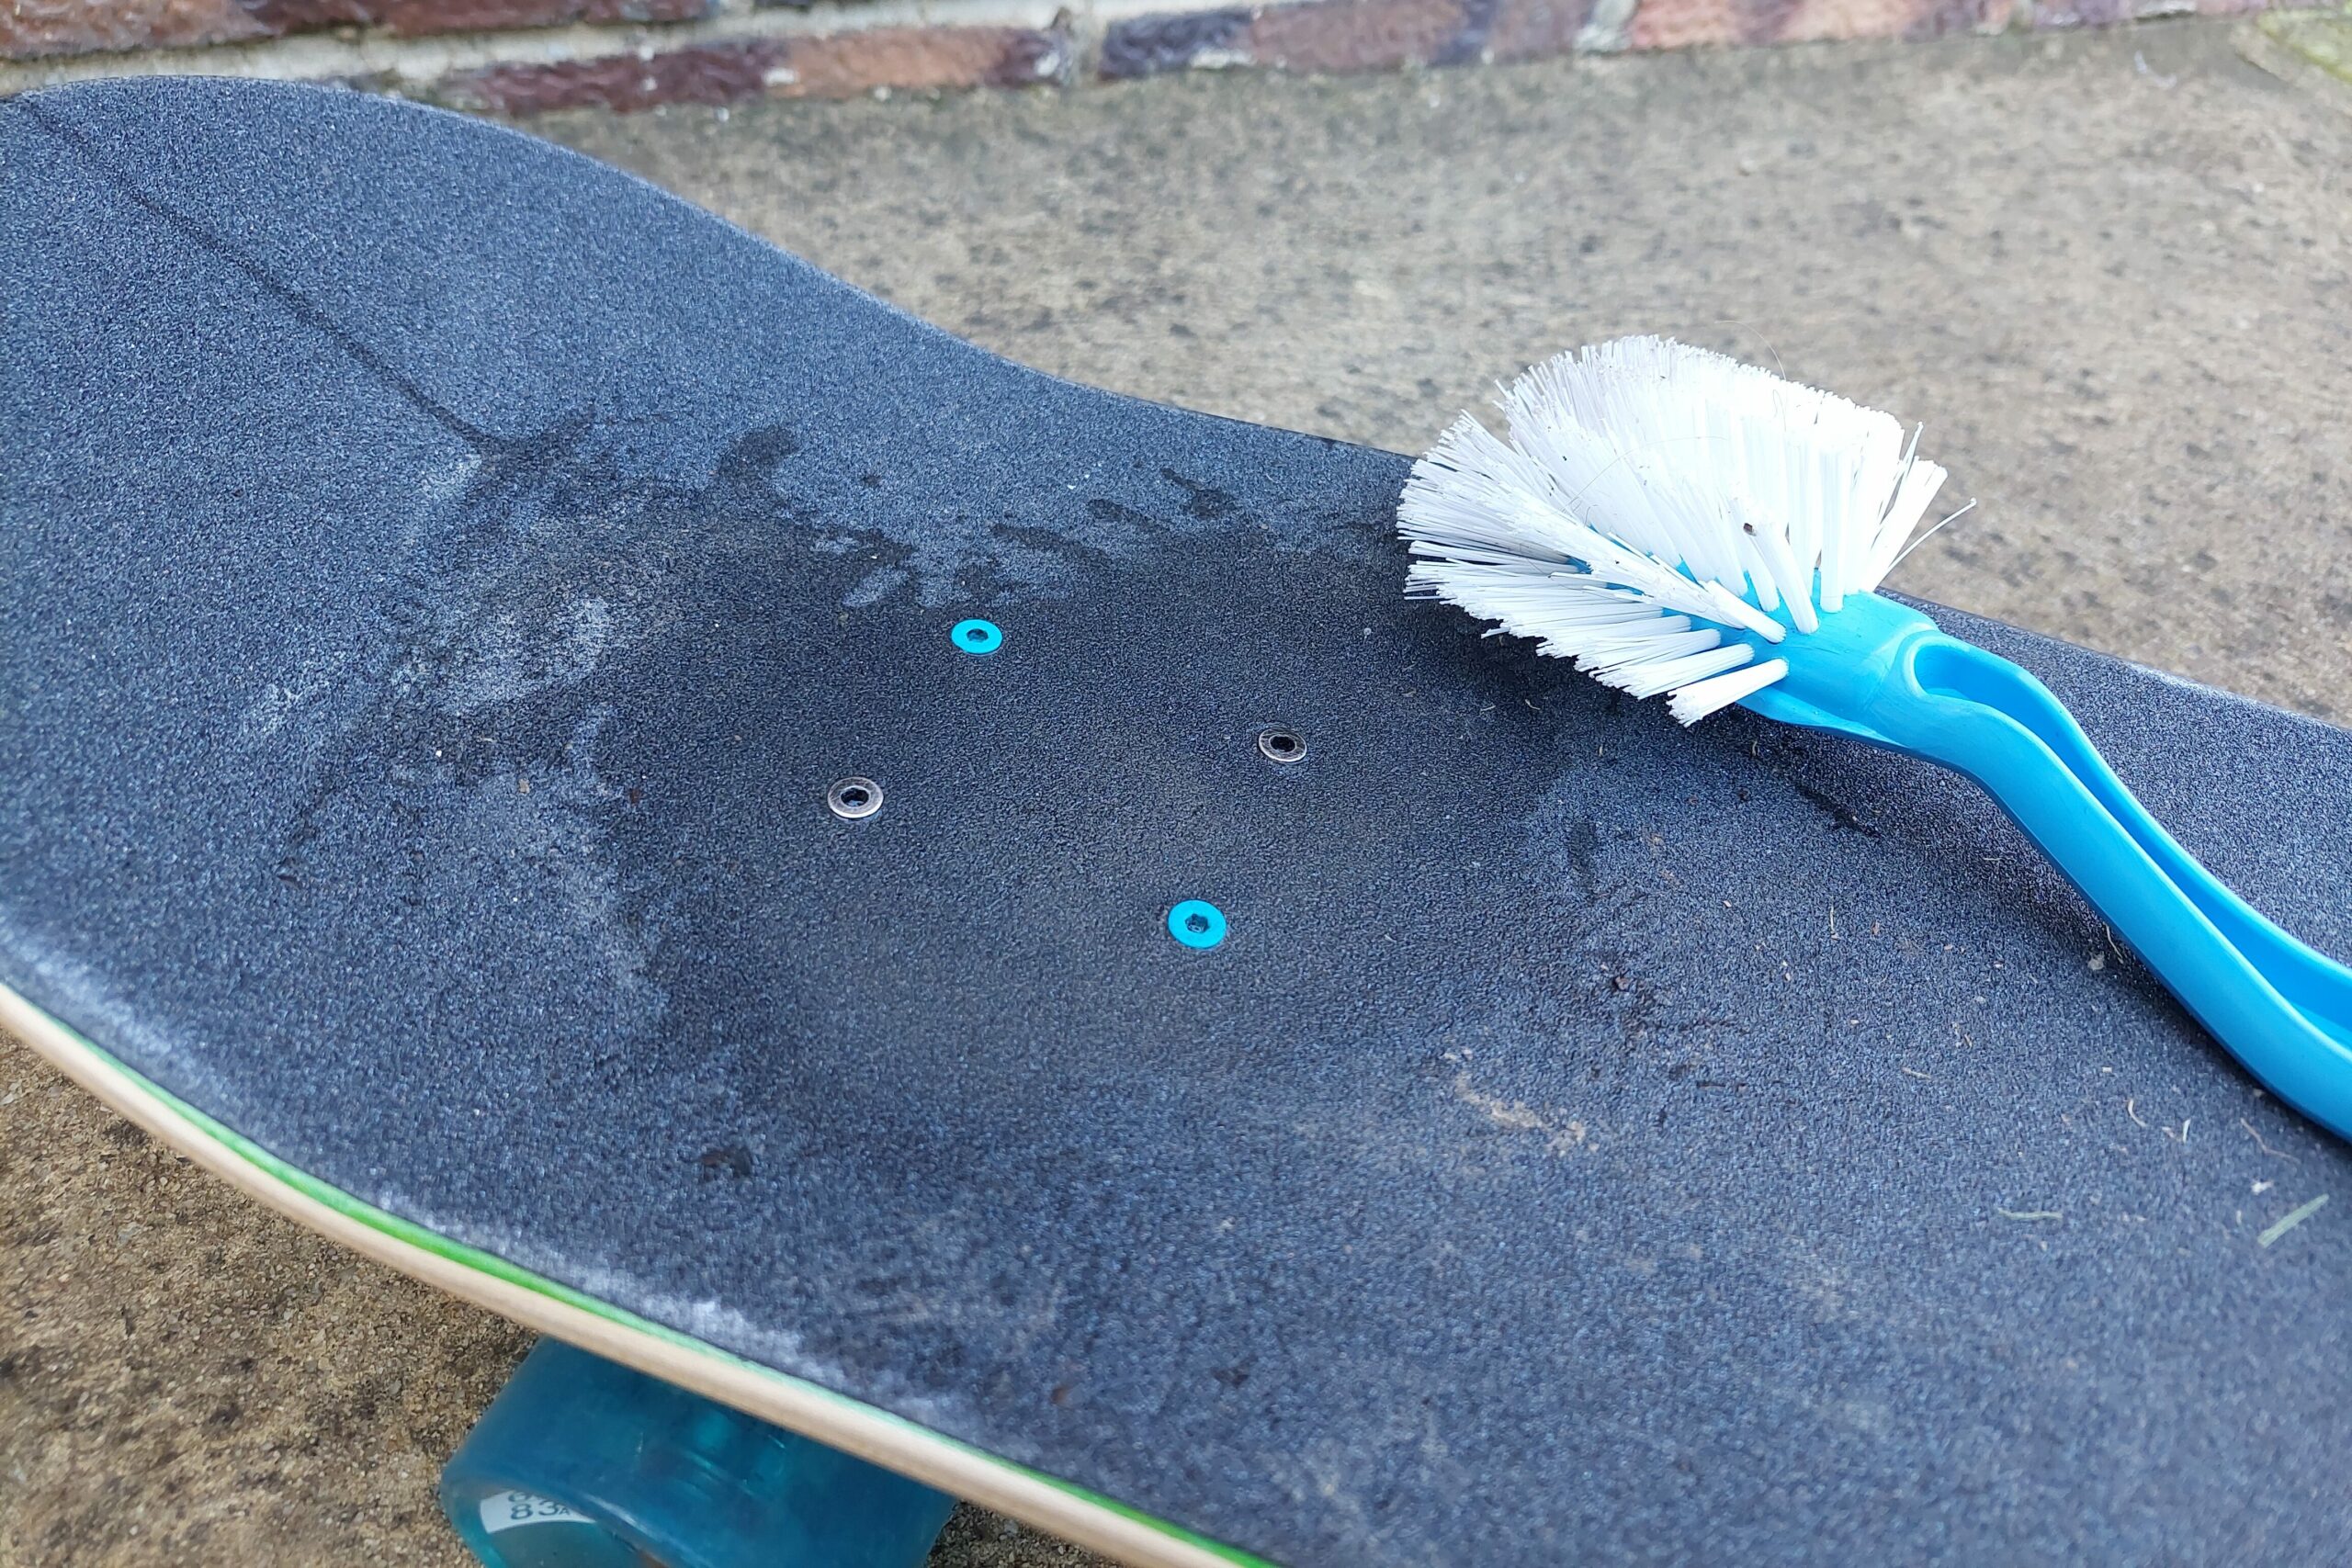 A close up of a dirty skateboard. There is a wet patch on the grip tape over the bolts where some of the dirt has been scrubbed off. The blue dishwashing brush is sitting on top of the board.